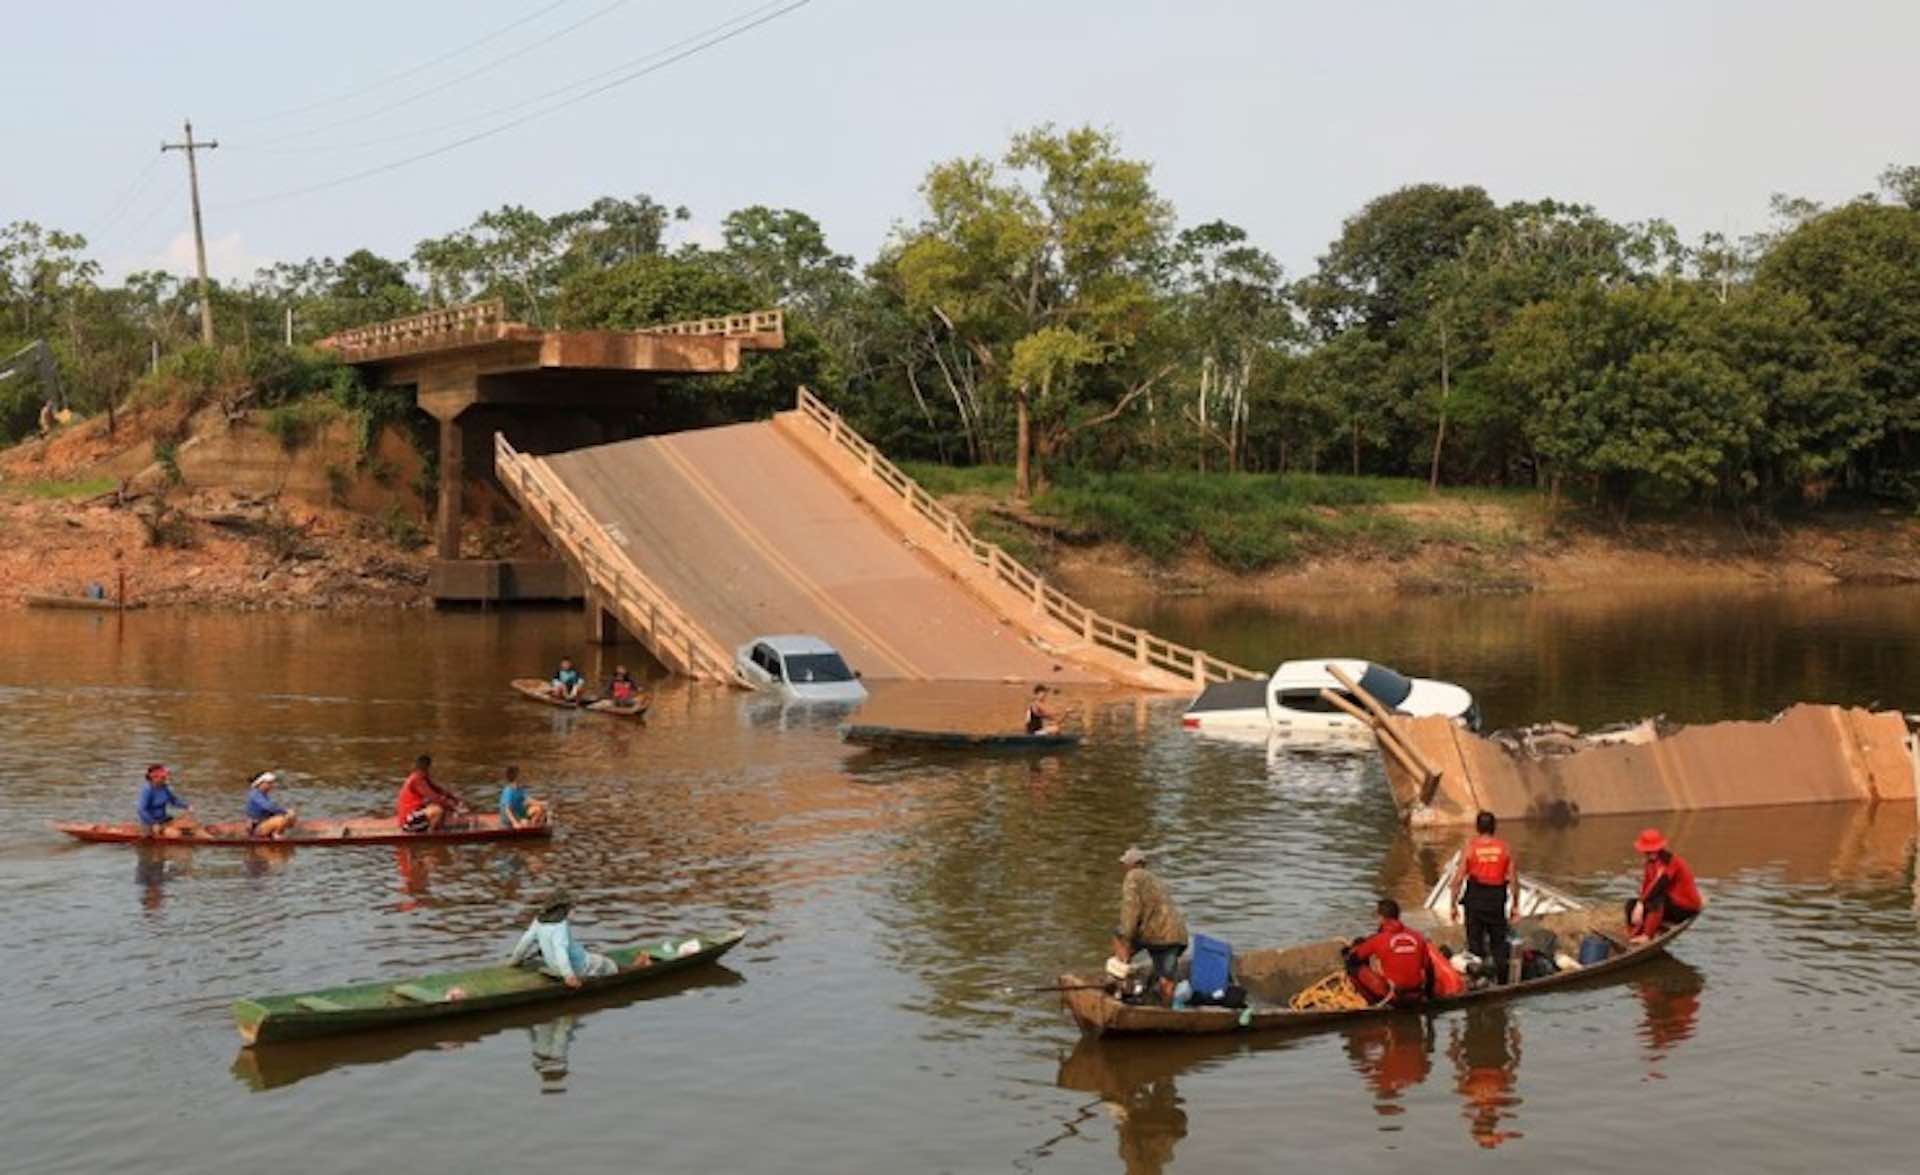 Three killed, 15 missing in Brazilian Amazonas after bridge collapses